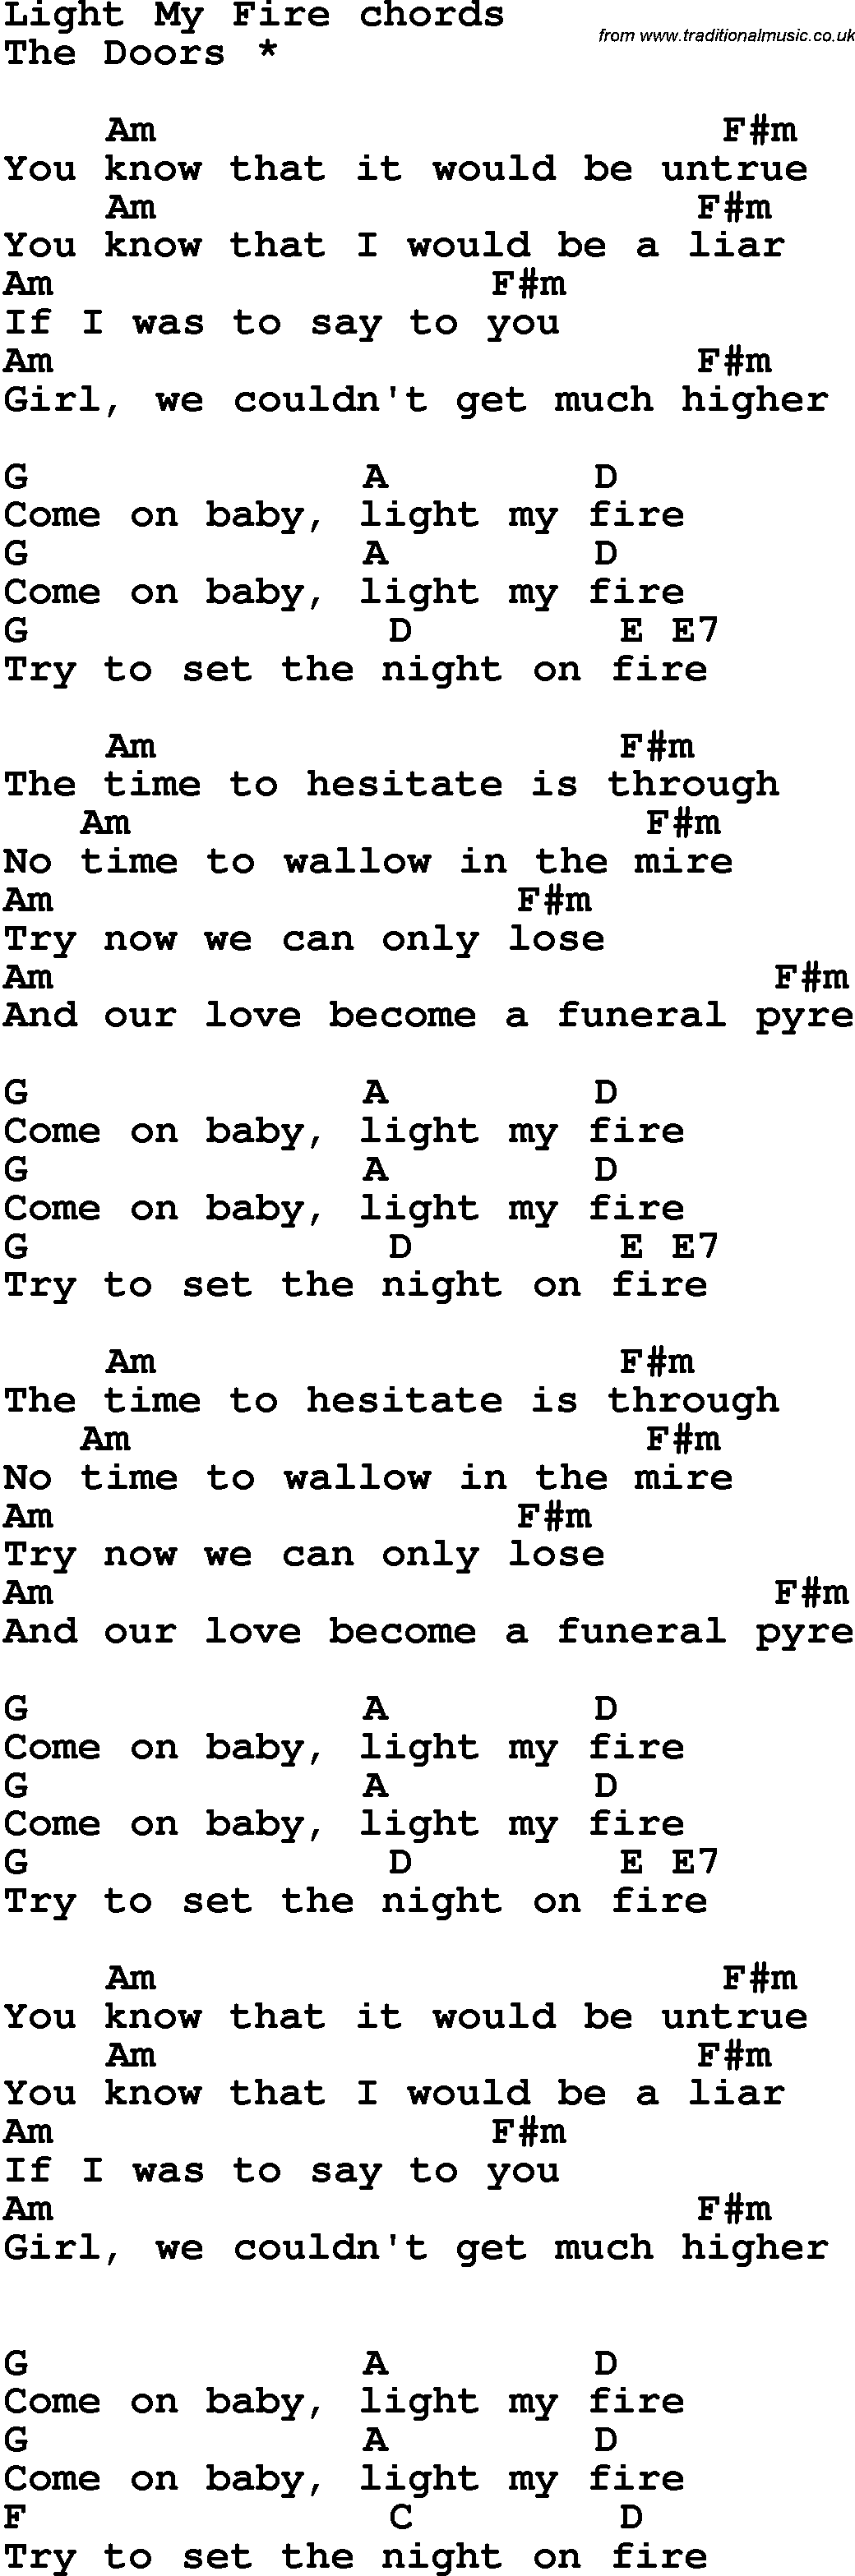 Song Lyrics with guitar chords for Light My Fire